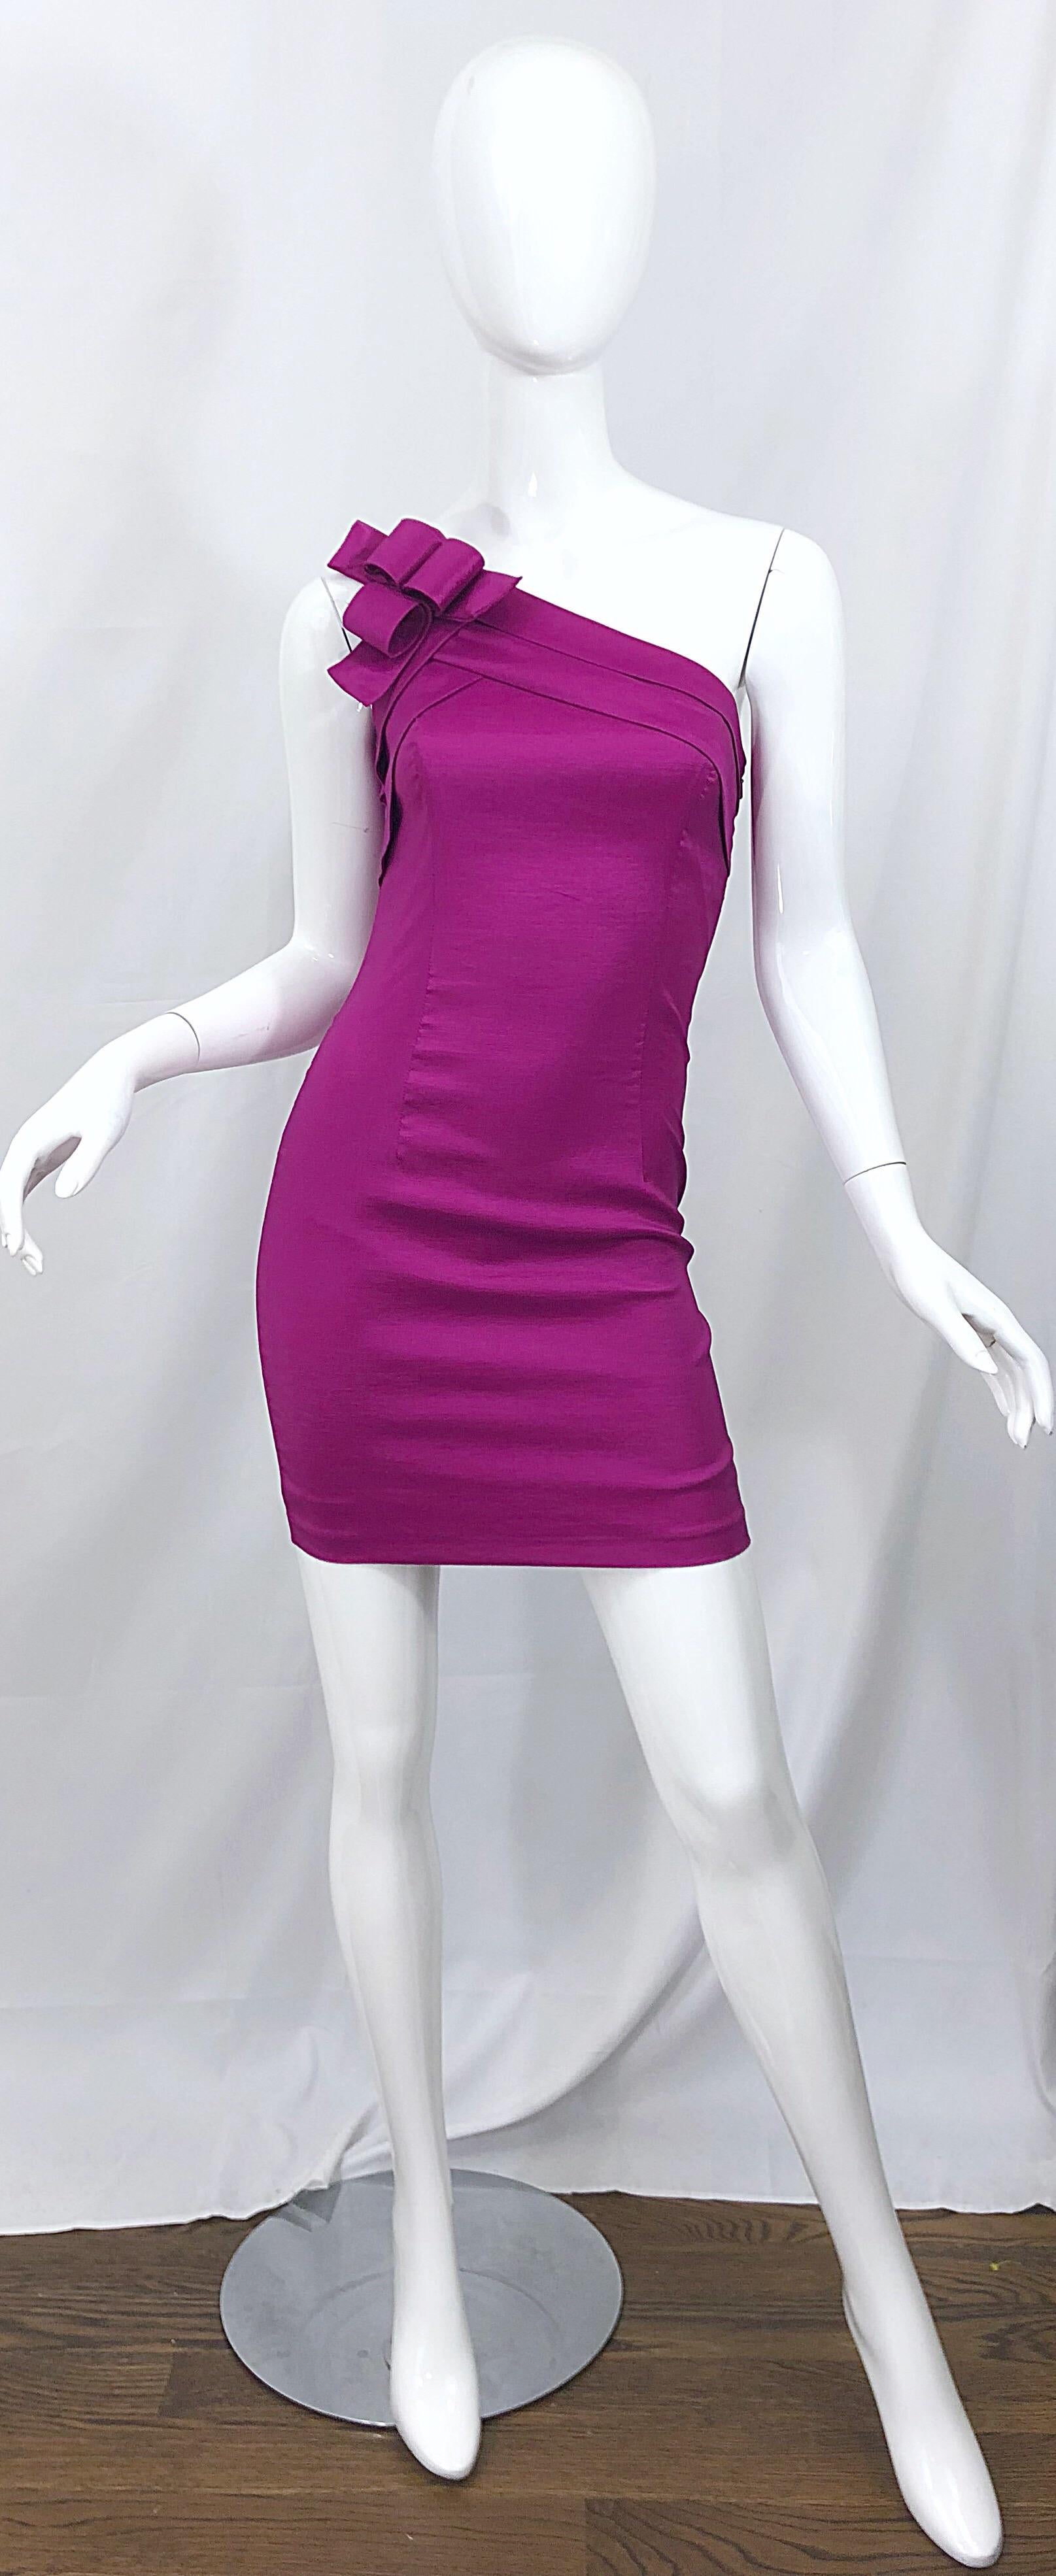 Sexy bodycon 90s  fuchsia / hot pink one shoulder mini dress! Features origami detail at top right shoulder. Hidden zipper up the side. Though no designer label remains, the quality and attention to detail is amazing. Fits like a dream, and